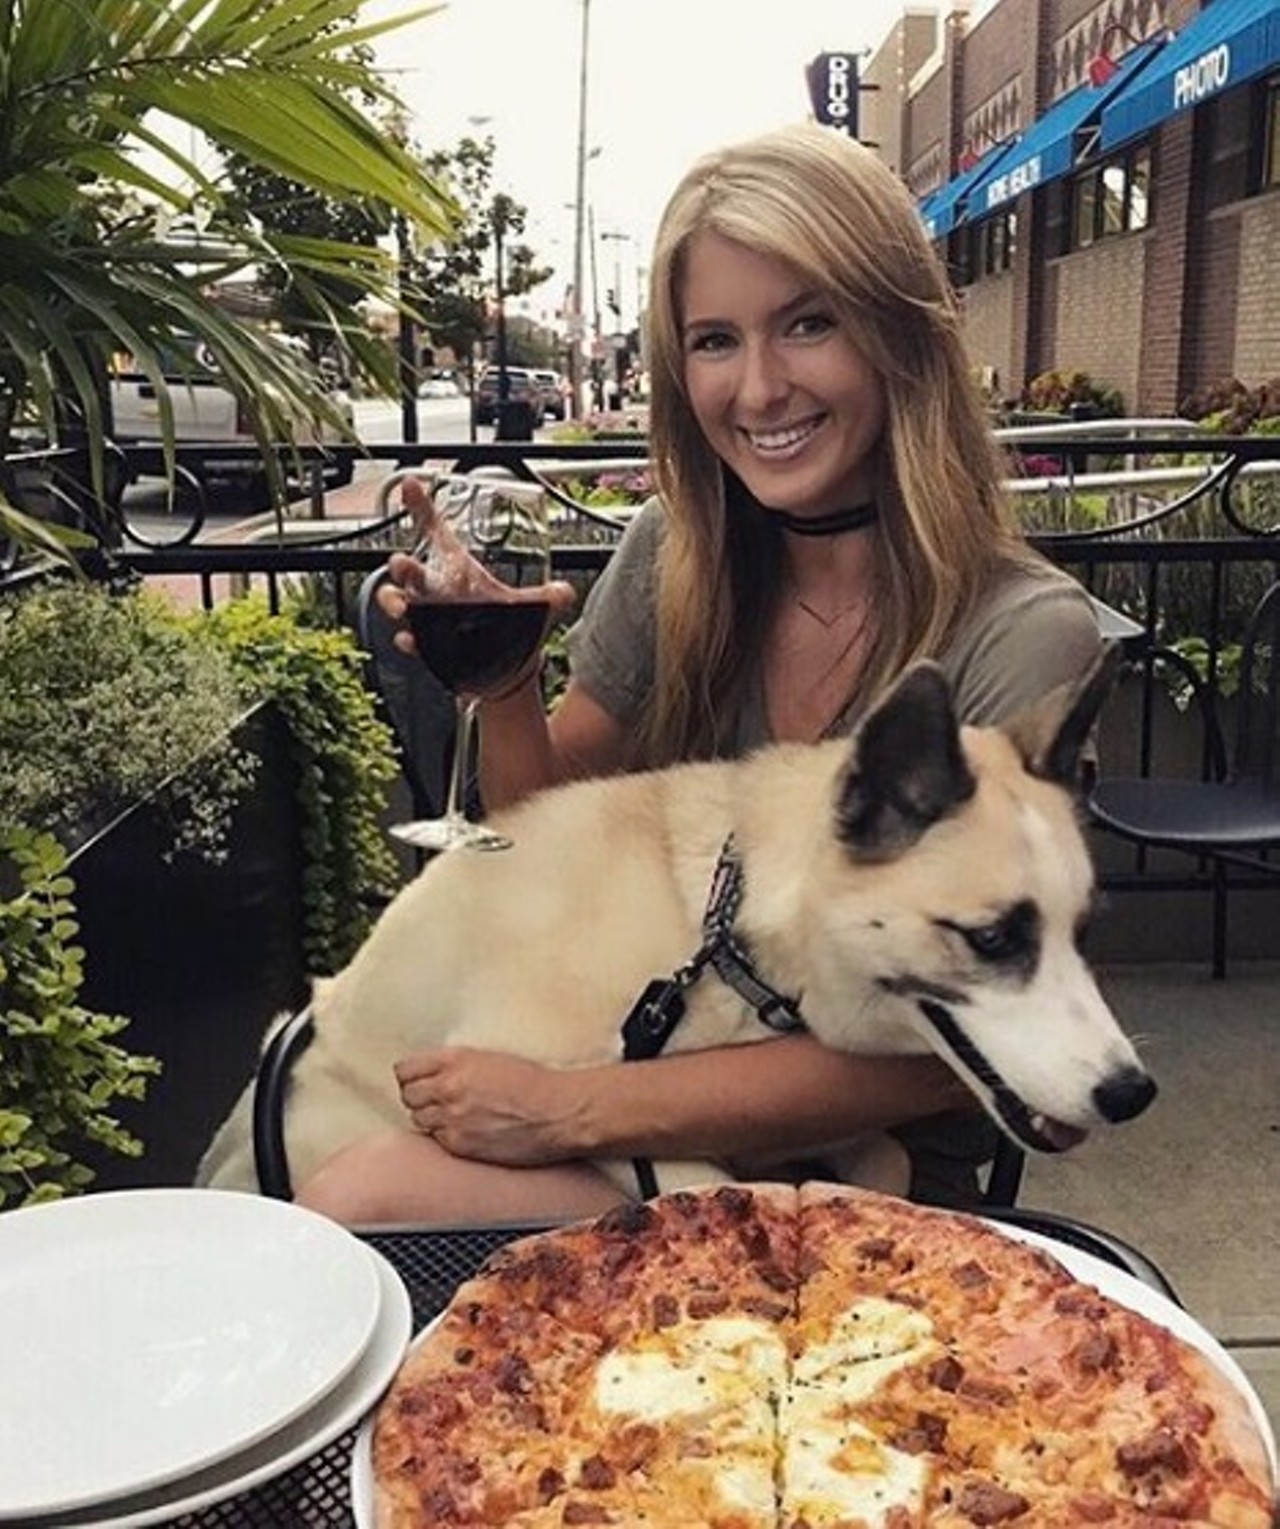 Humble Wine Bar
15400 Detroit Rd., Lakewood 
This relaxing patio lets you sip a glass of wine, while your favorite friend snuggles at your feet. Nothing's better than that.  
Photo via _ashcarpenter/Instagram